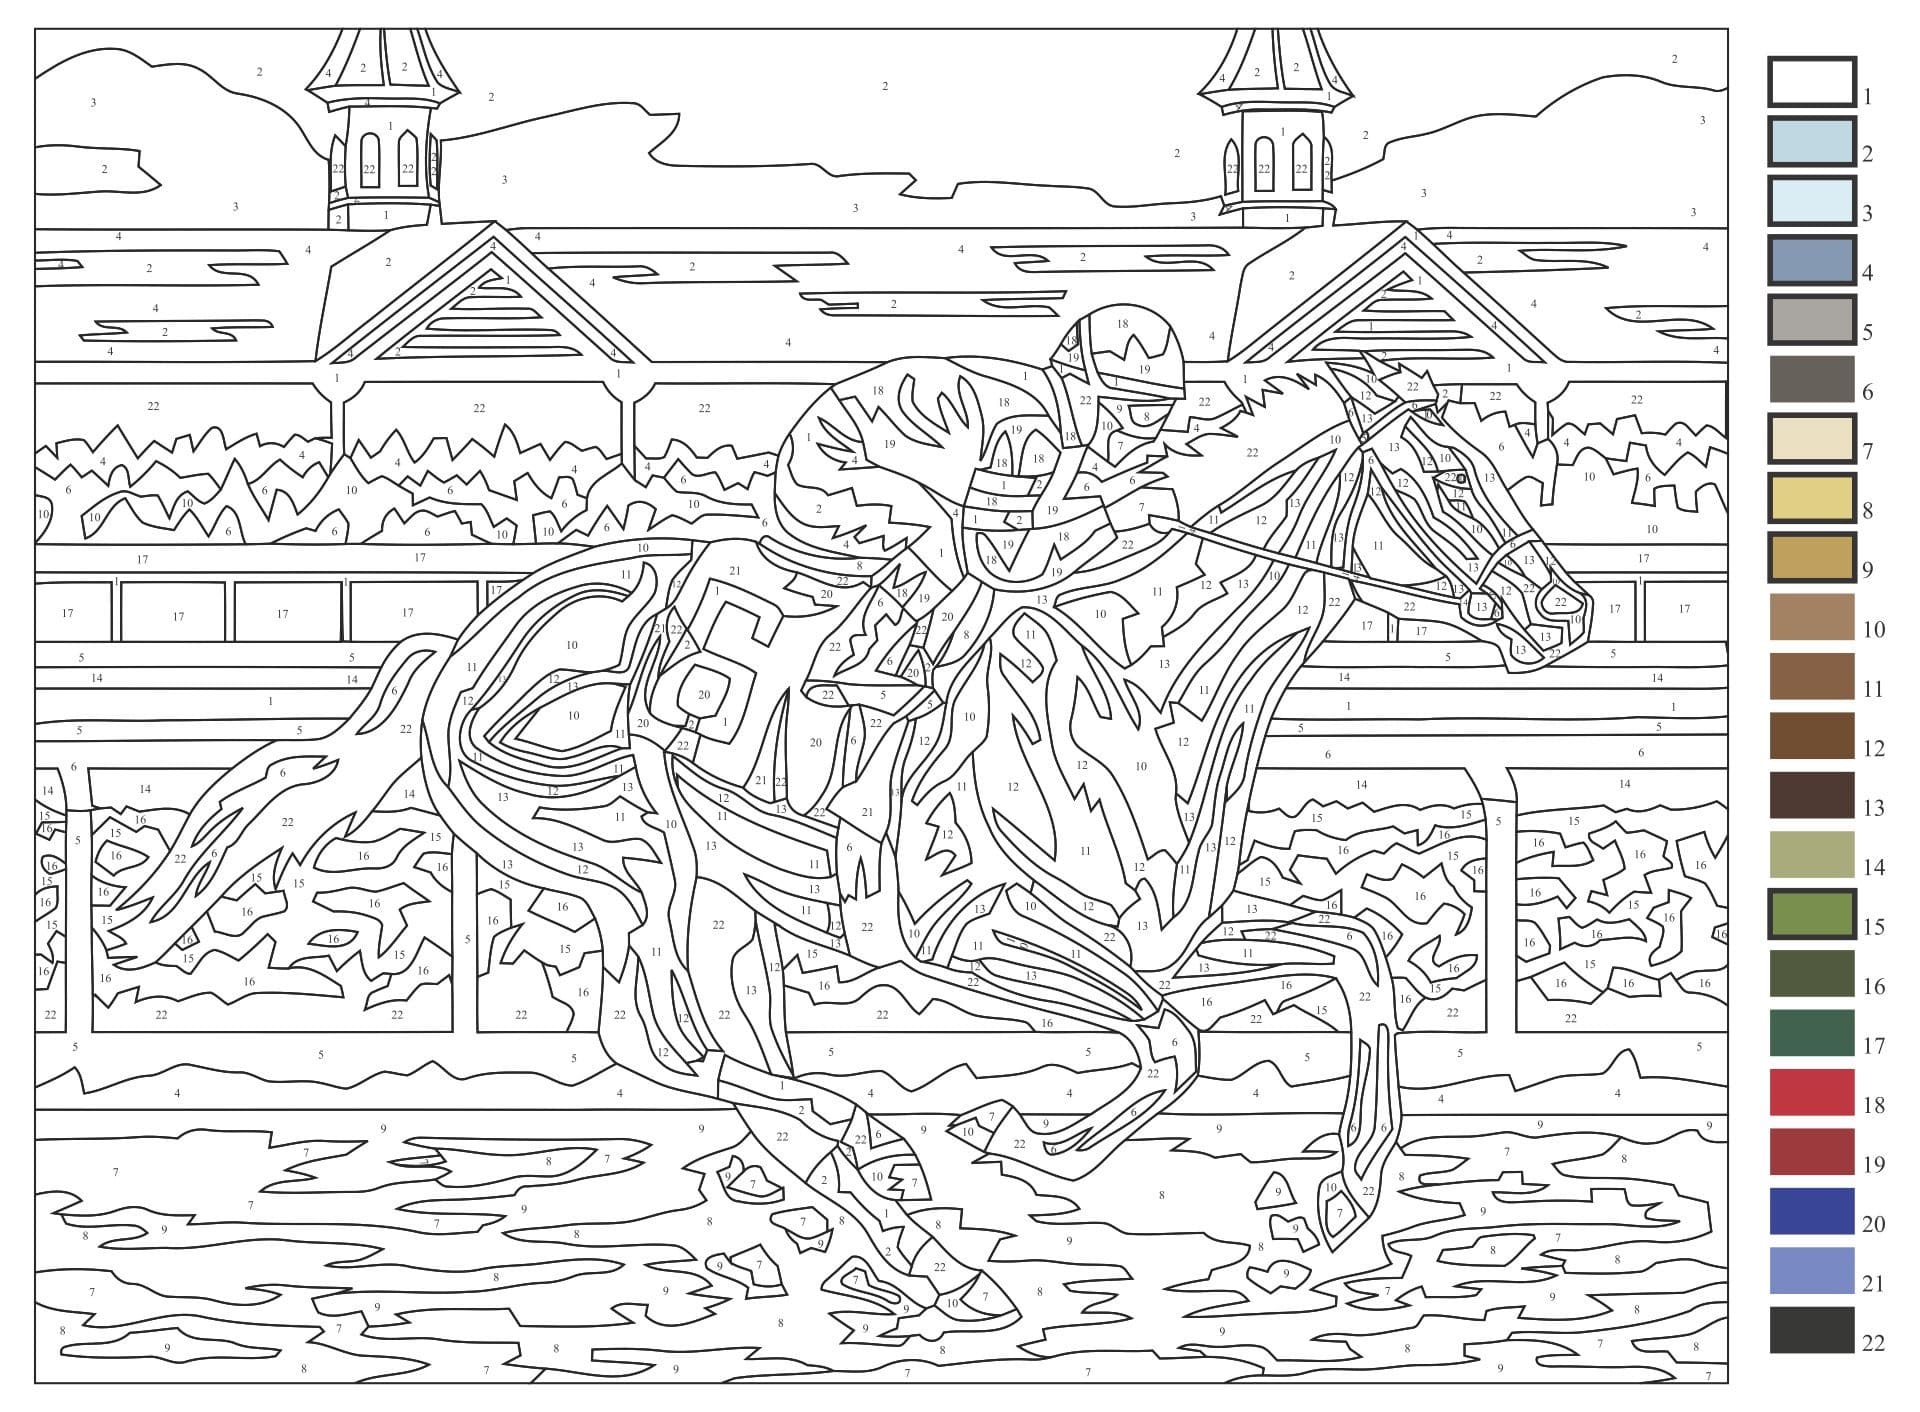 Advanced Color by Numbers Coloring Page   Free Printable Coloring ...